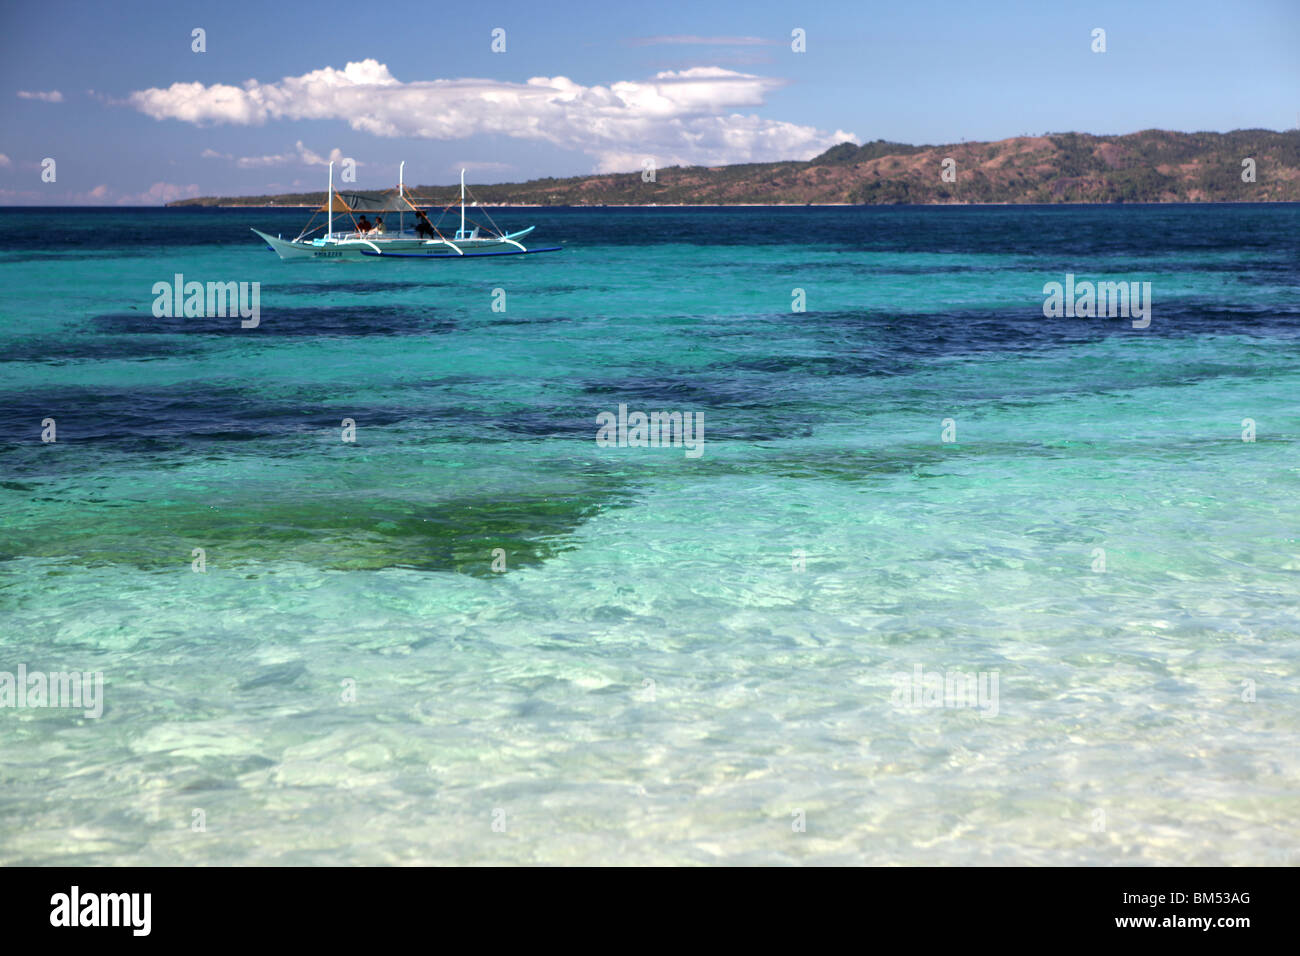 Boats at Puka Beach at the northern end of Barocay Island in the Visayas region of Philippines. Stock Photo